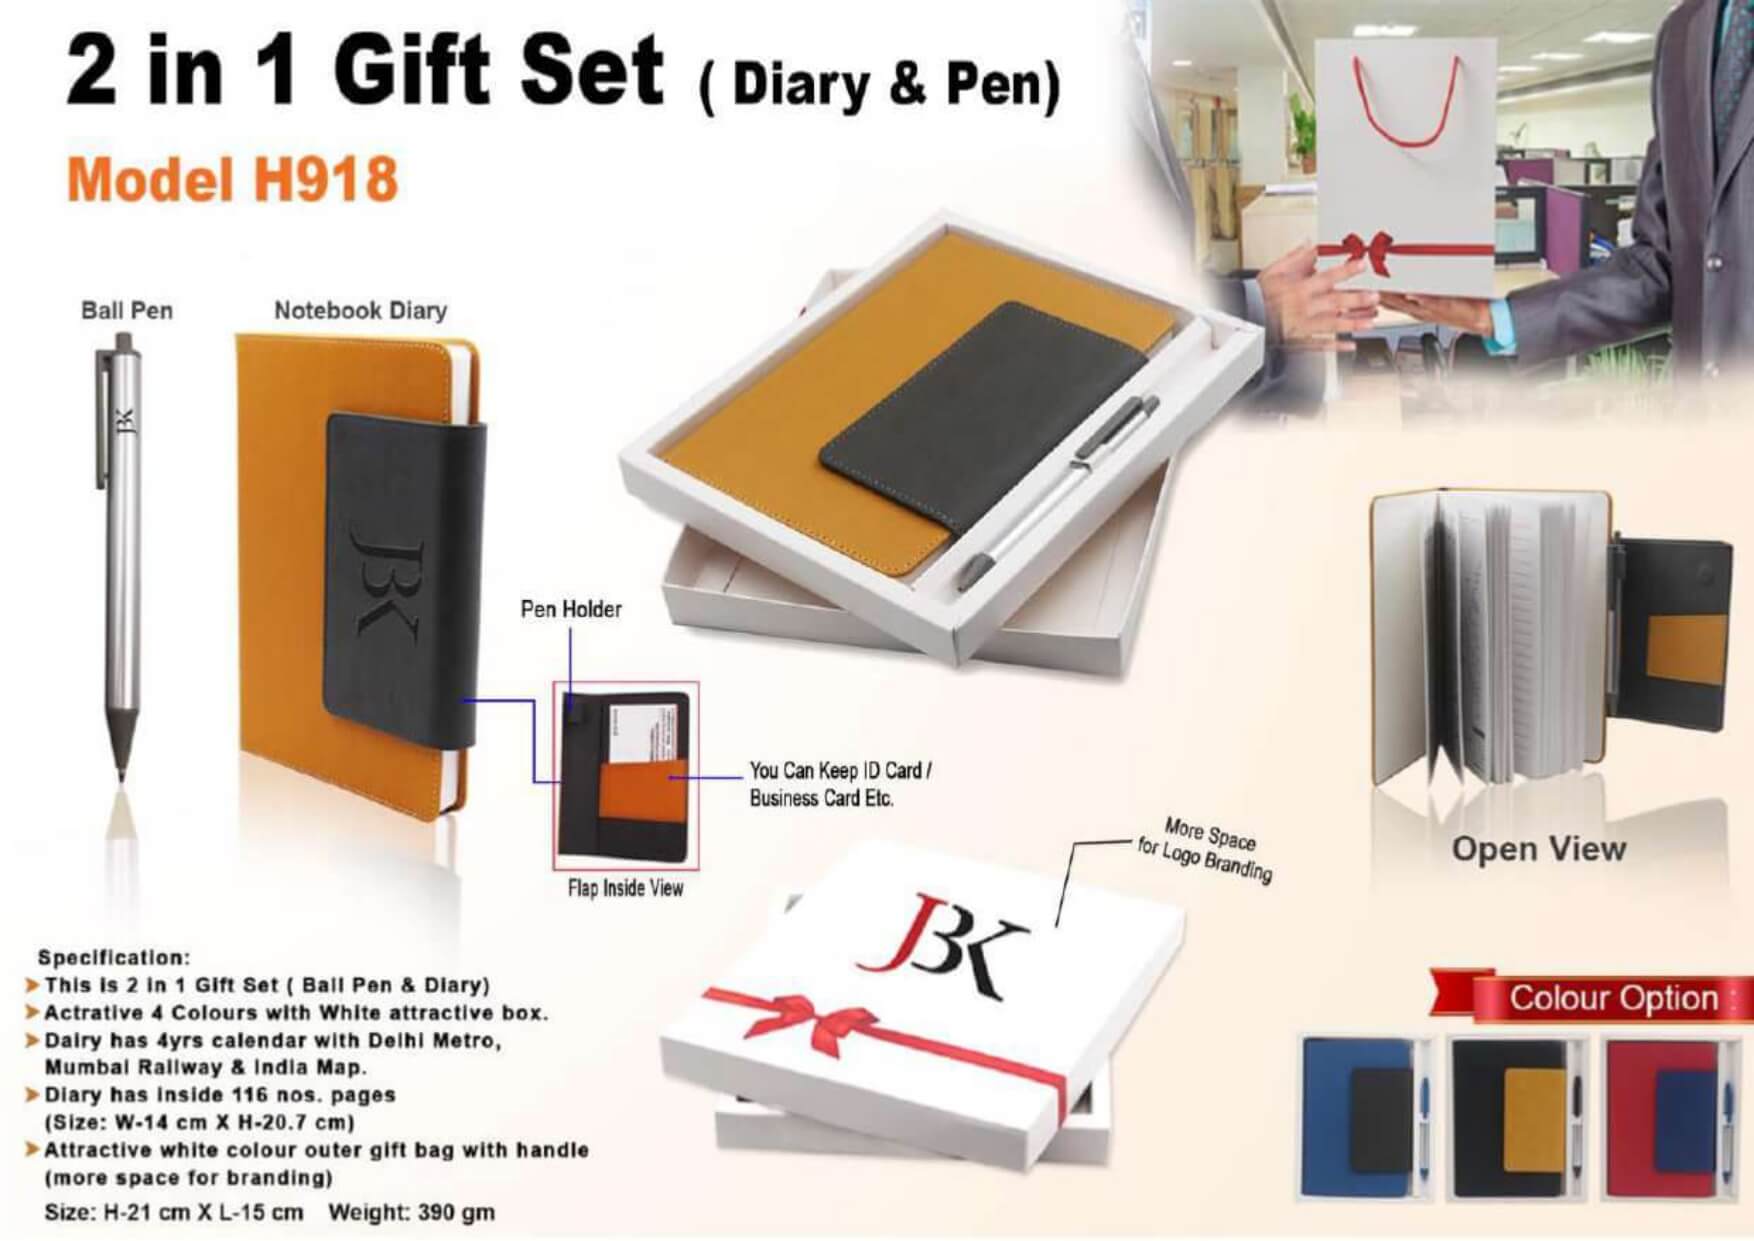 Diary and Pen 2 in 1 Gift Set 918